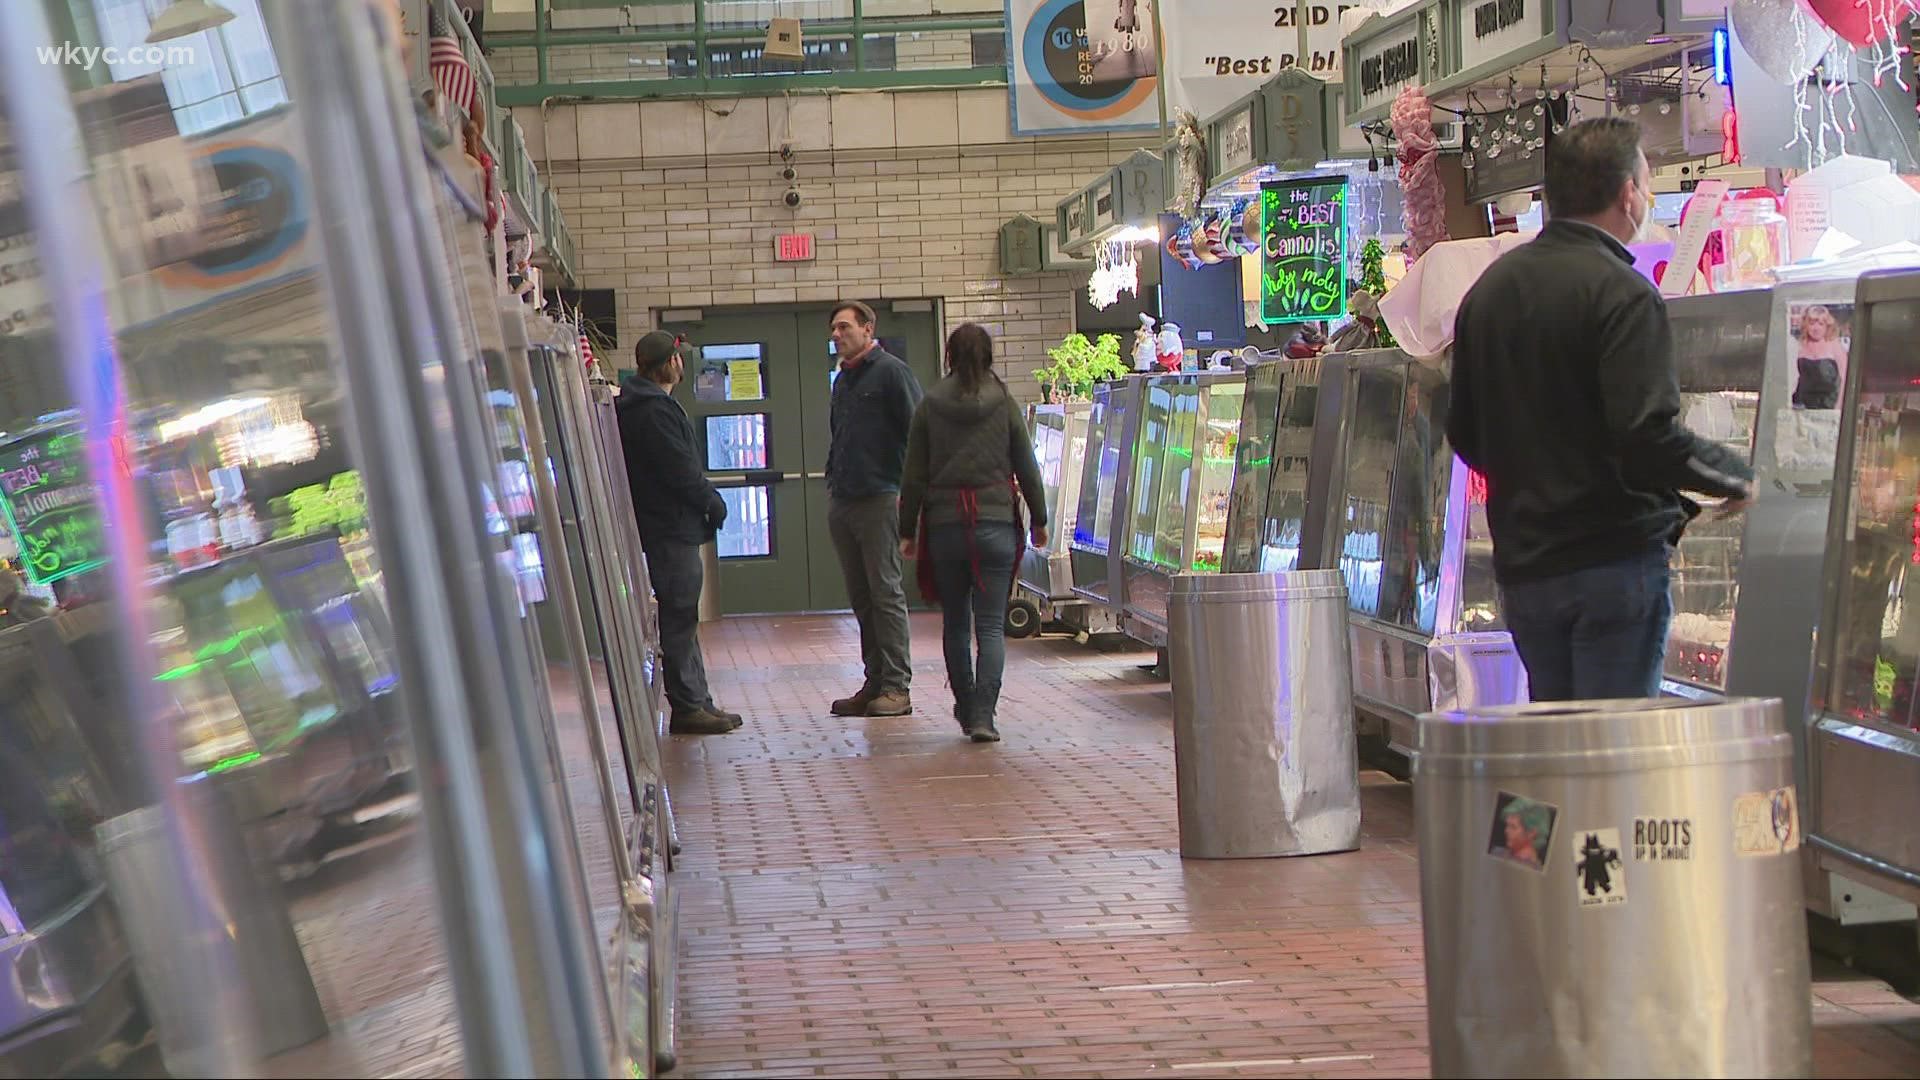 The West Side Market is typically busy on Wednesday's but today, it was unexpectedly closed due to electrical issues.